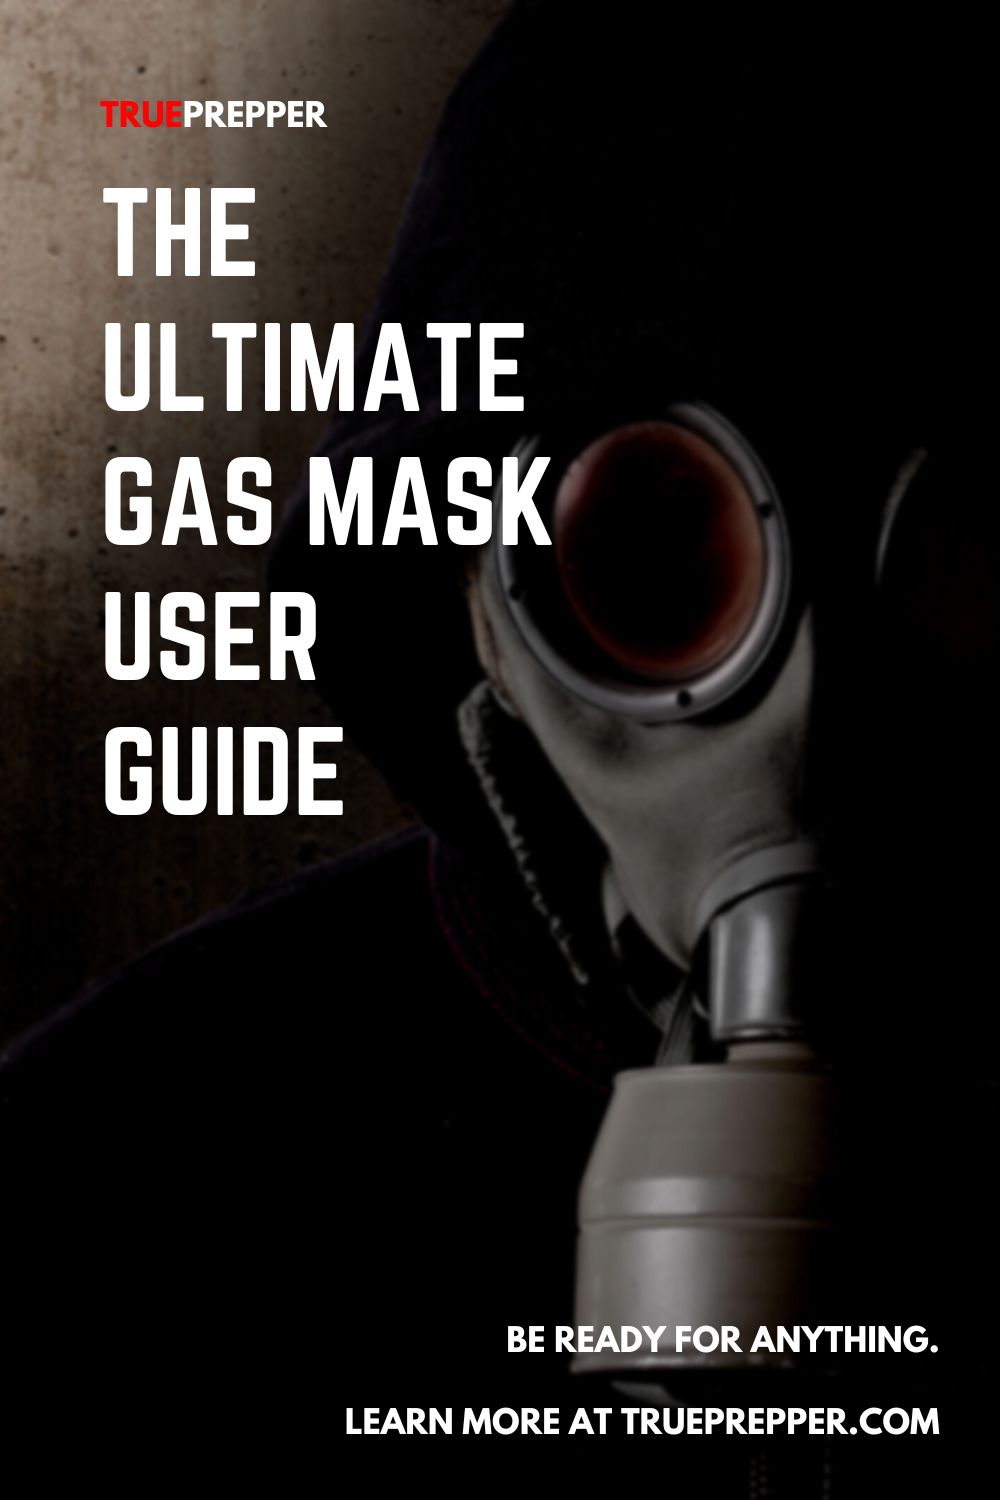 The Ultimate Gas Mask User Guide